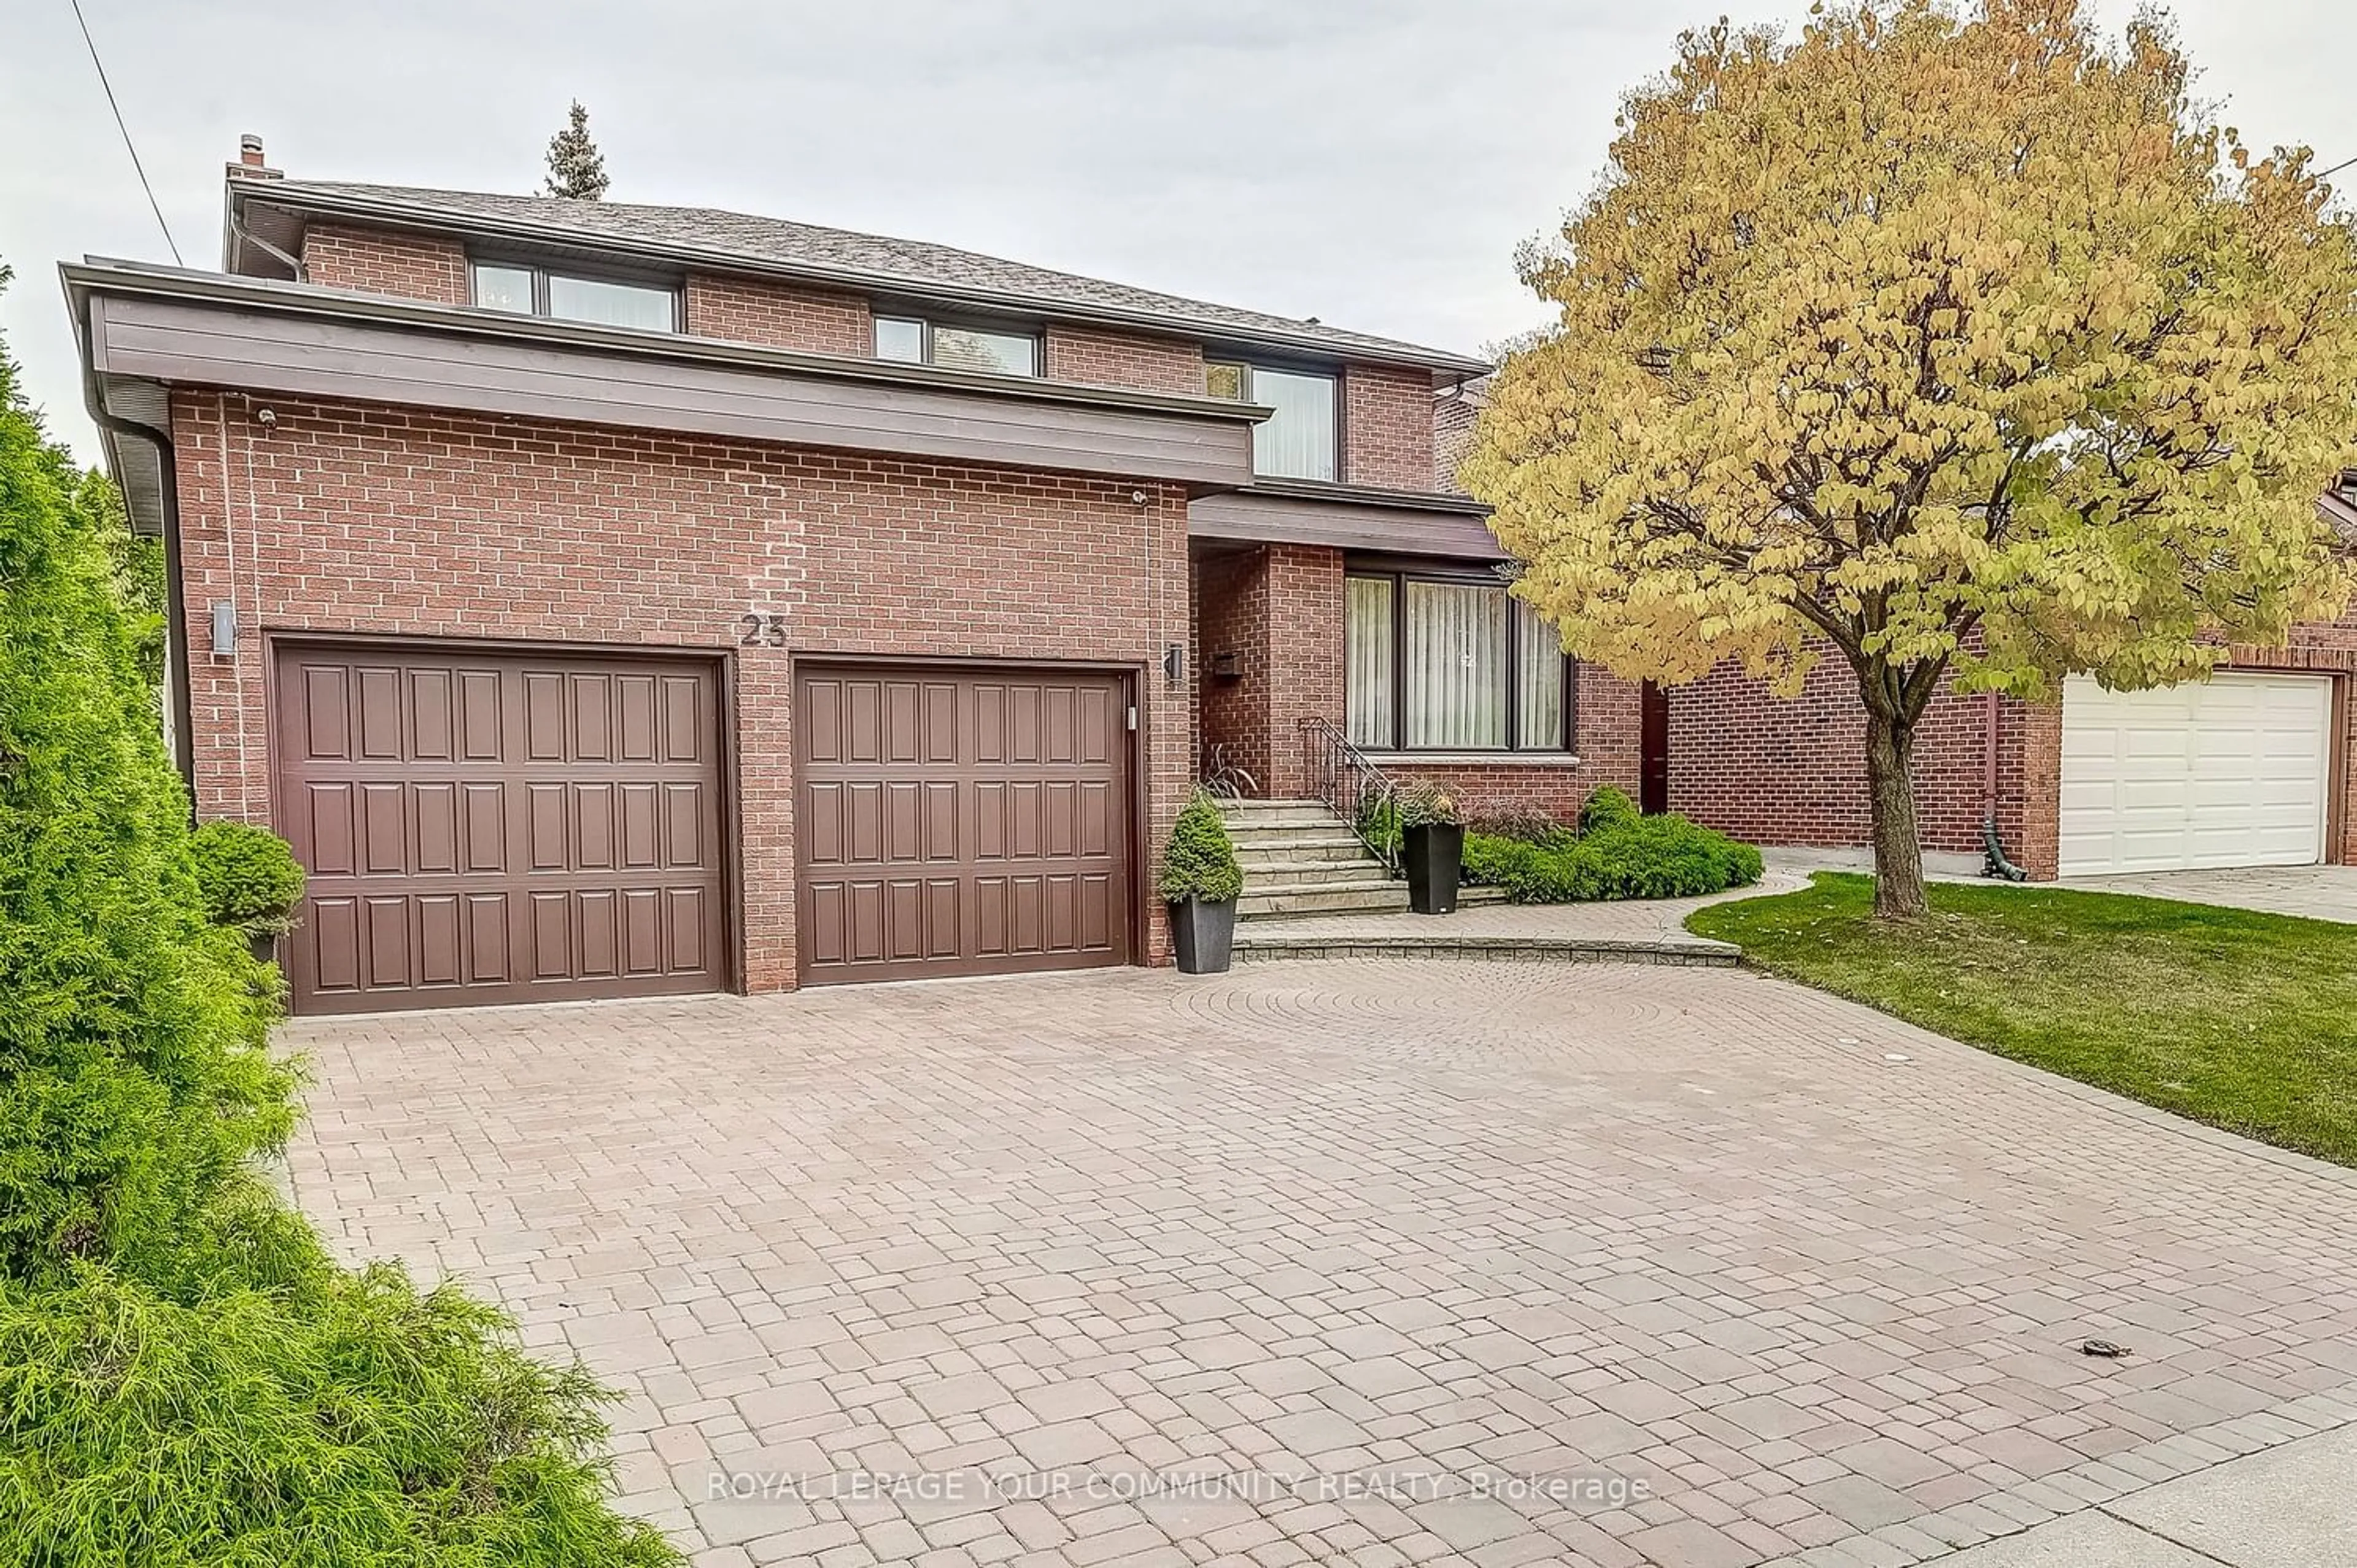 Home with brick exterior material for 23 Radway Ave, Toronto Ontario M9C 1J7